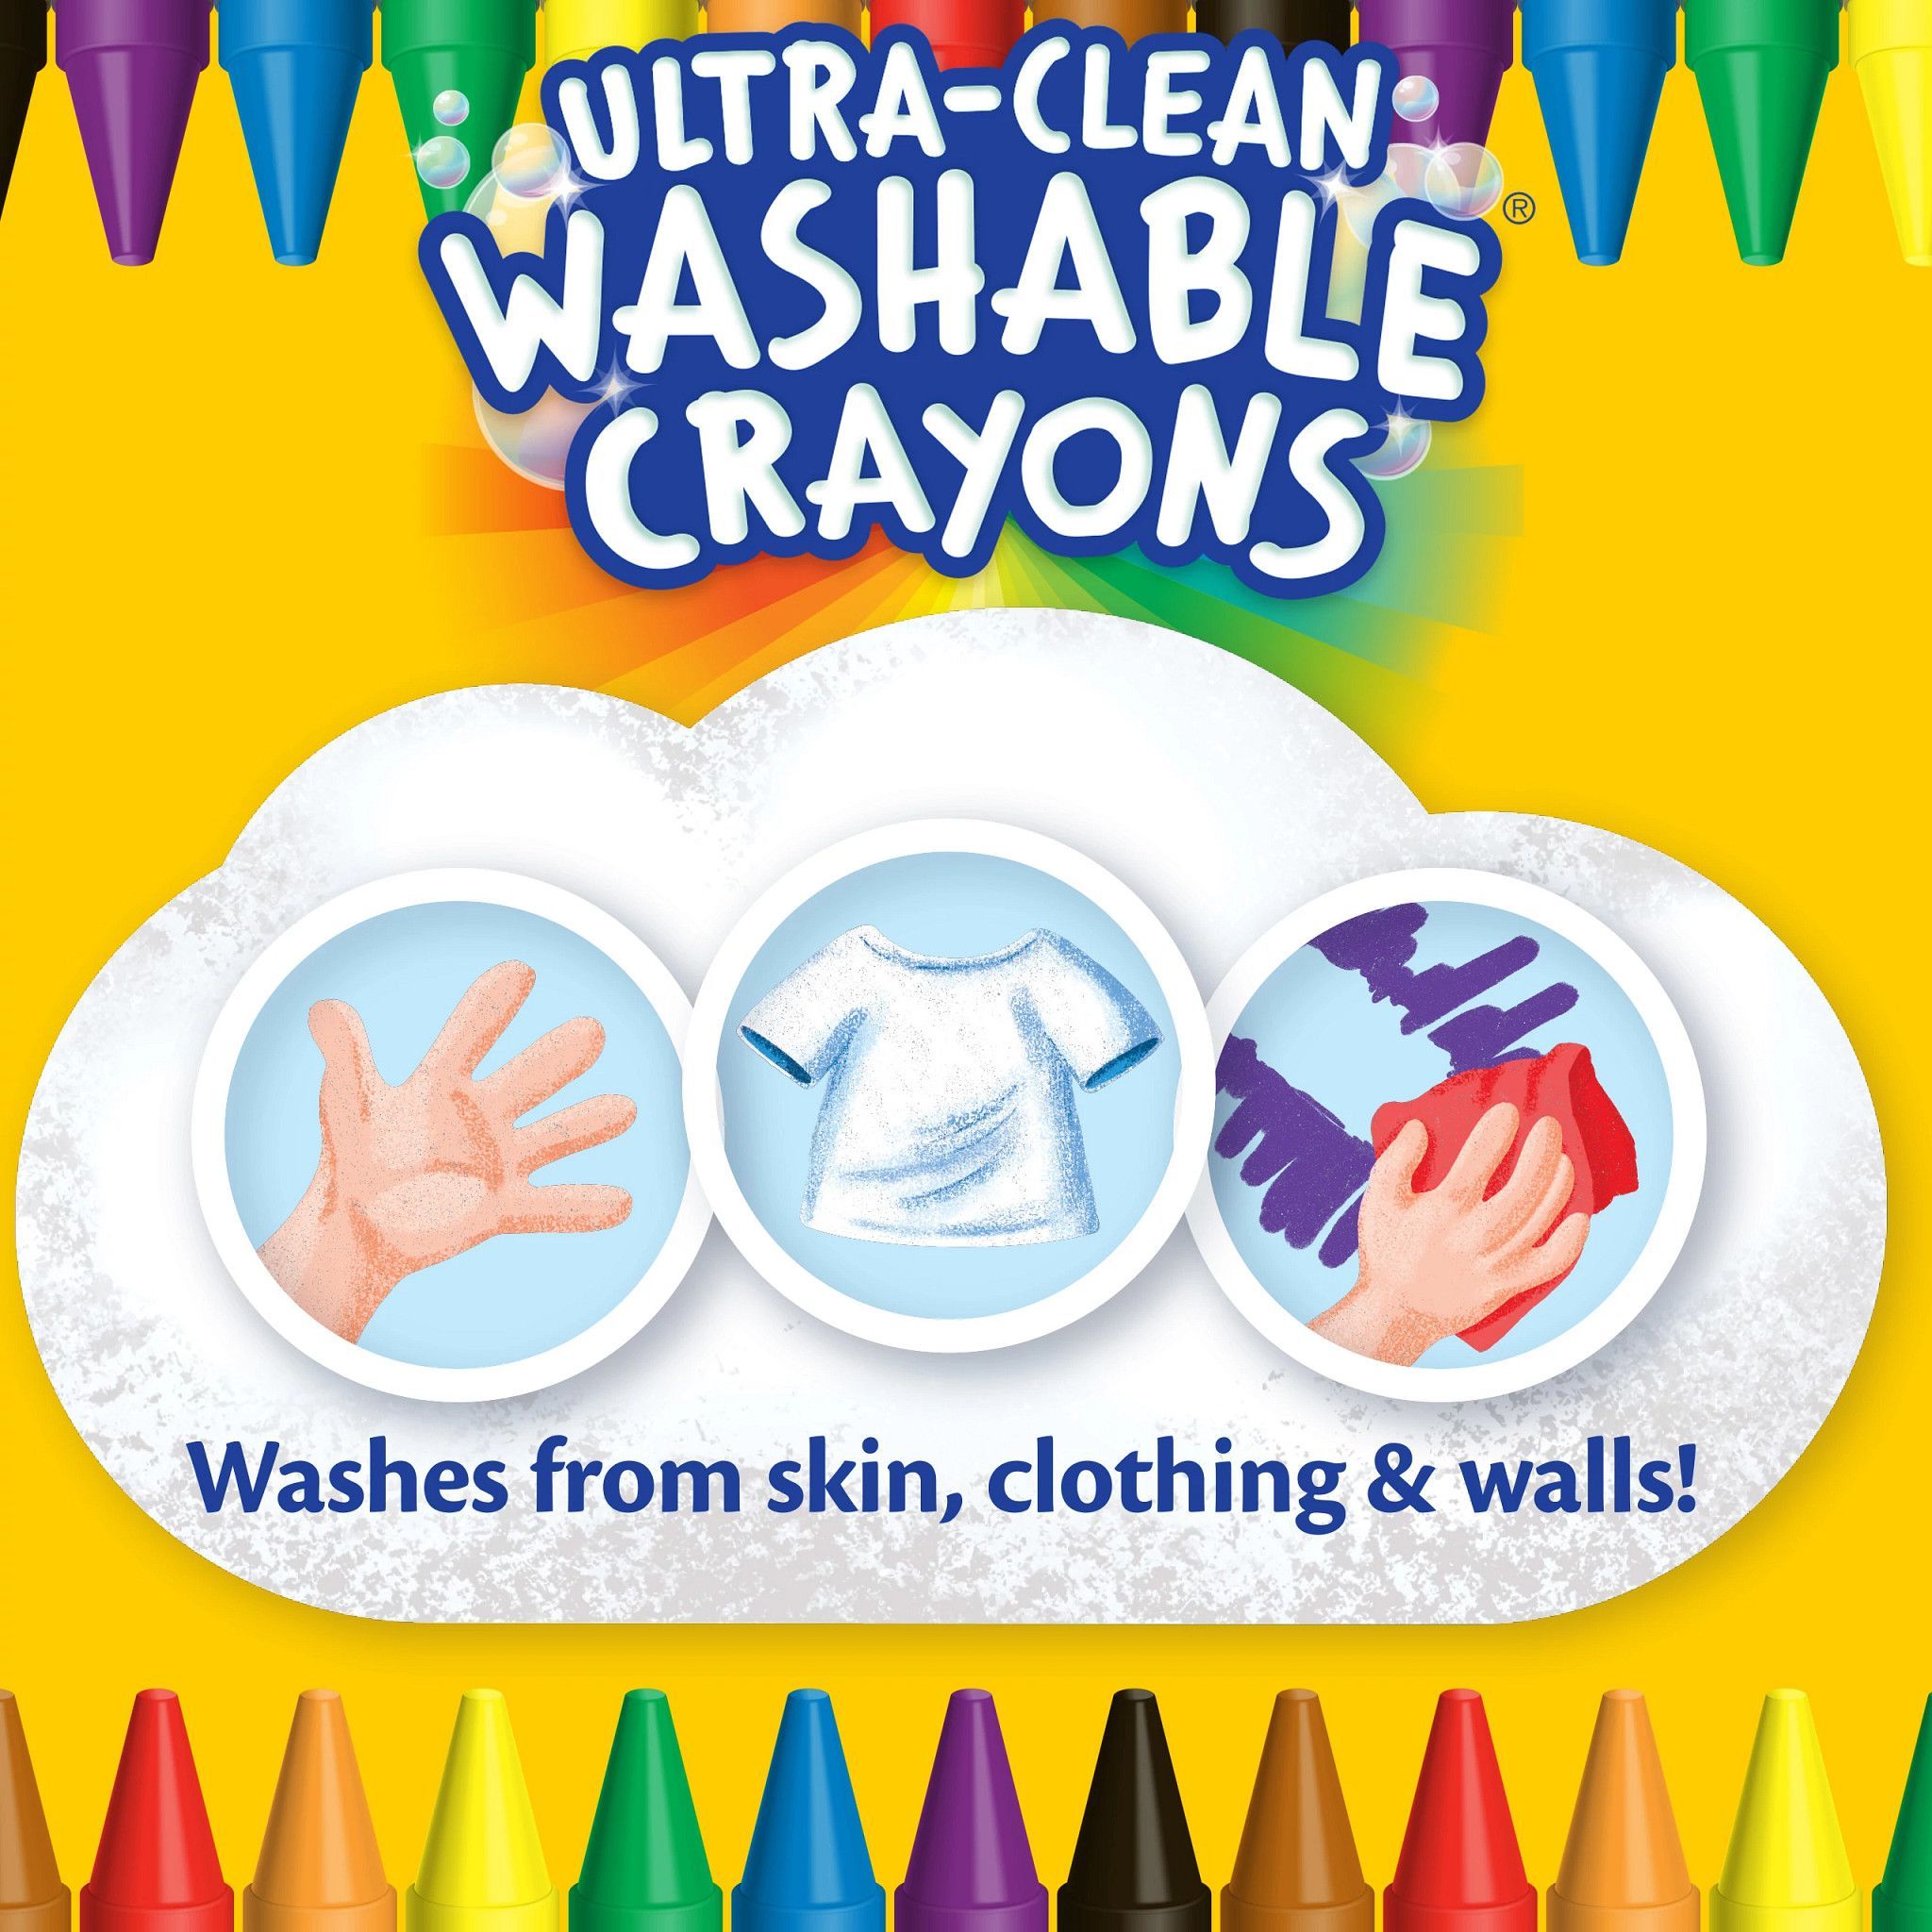 Crayola Ultra-Clean Washable Crayons, 24 Ct, Back to School Supplies for Kids, Art Supplies - image 3 of 9